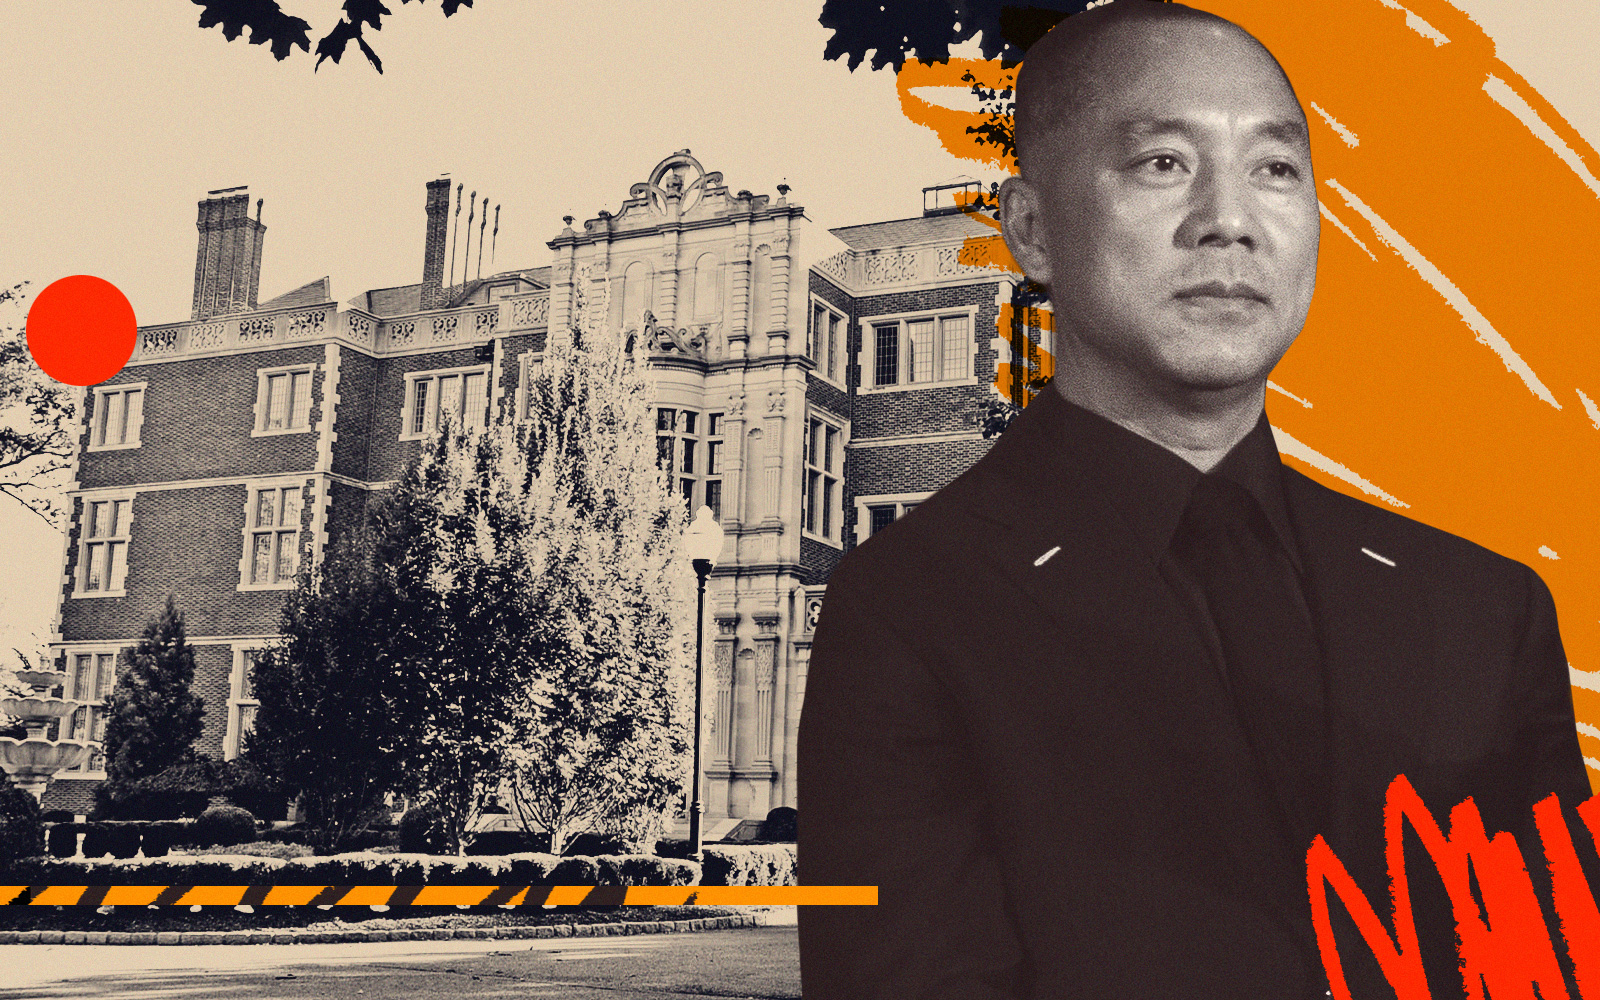 Guo Wengui with the Crocker-McMillin mansion